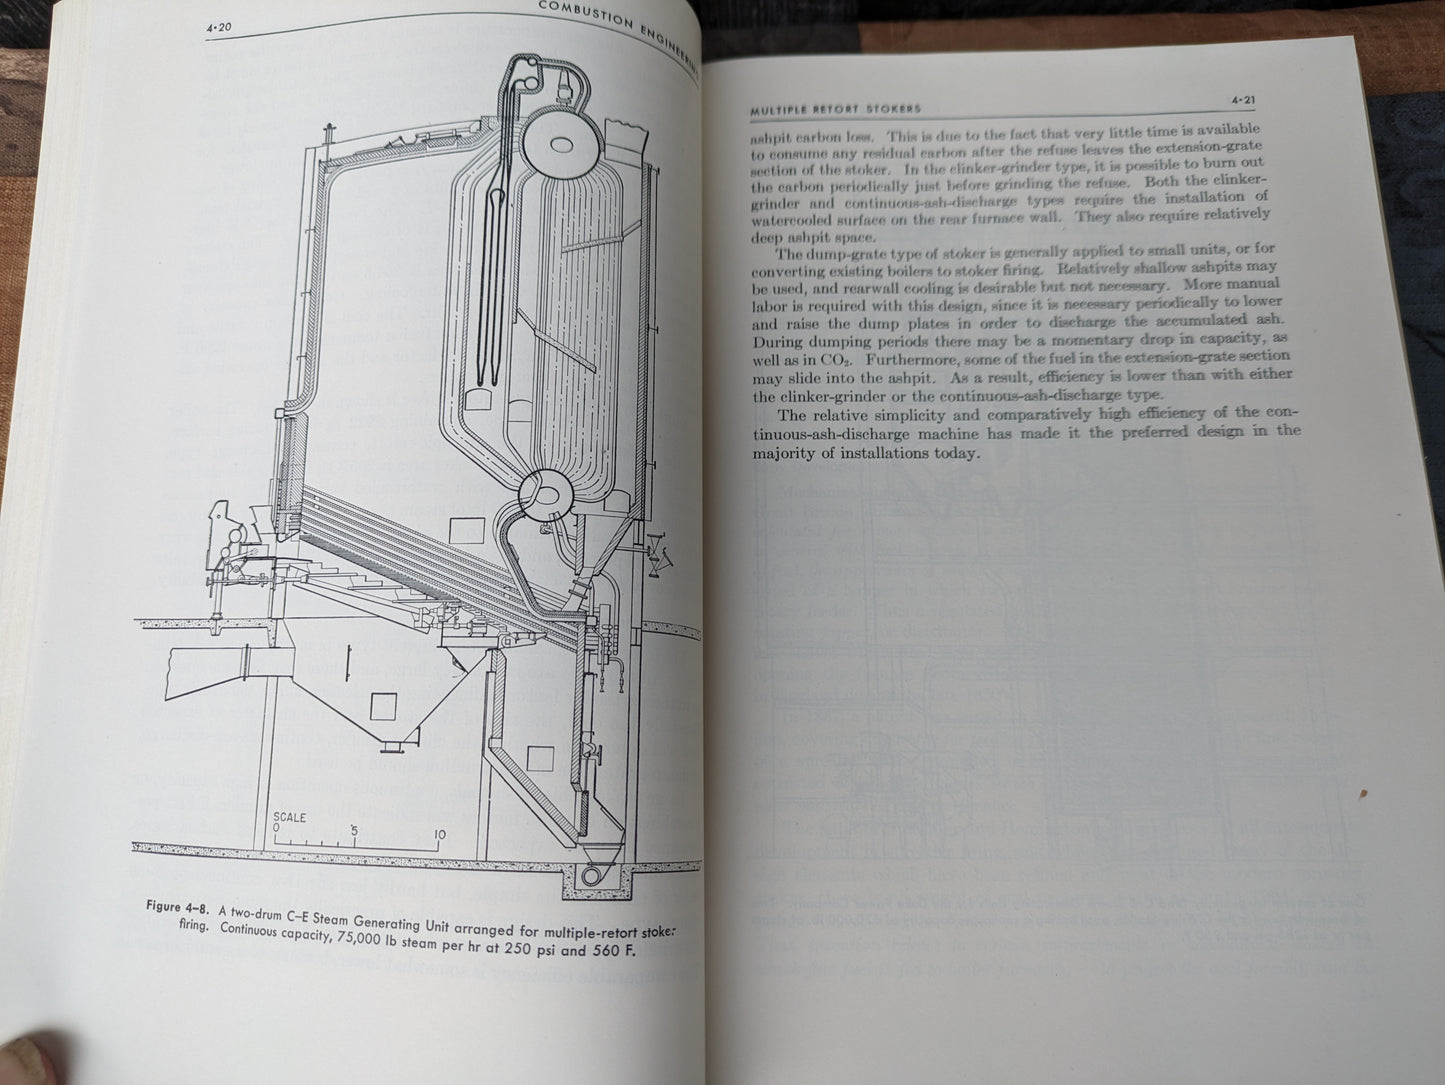 Combustion Engineering, A reference Book on Fuel Burning and Steam Generation, Otto de Lorenzi, 1950.